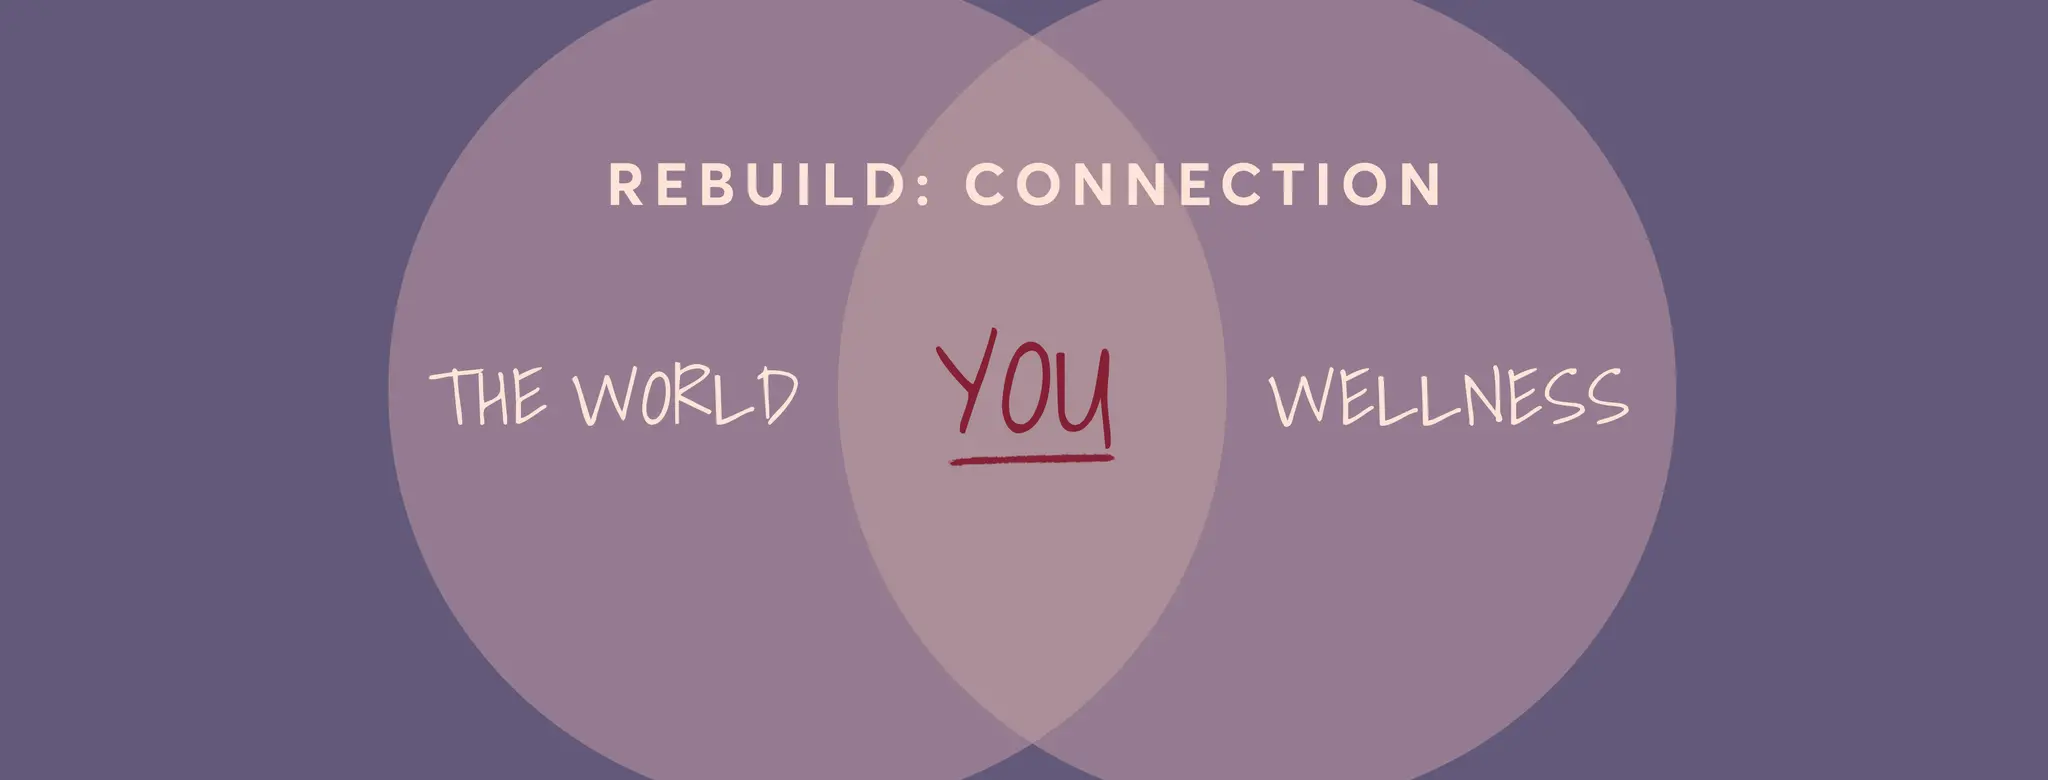 rebuild the connection between the world and wellness